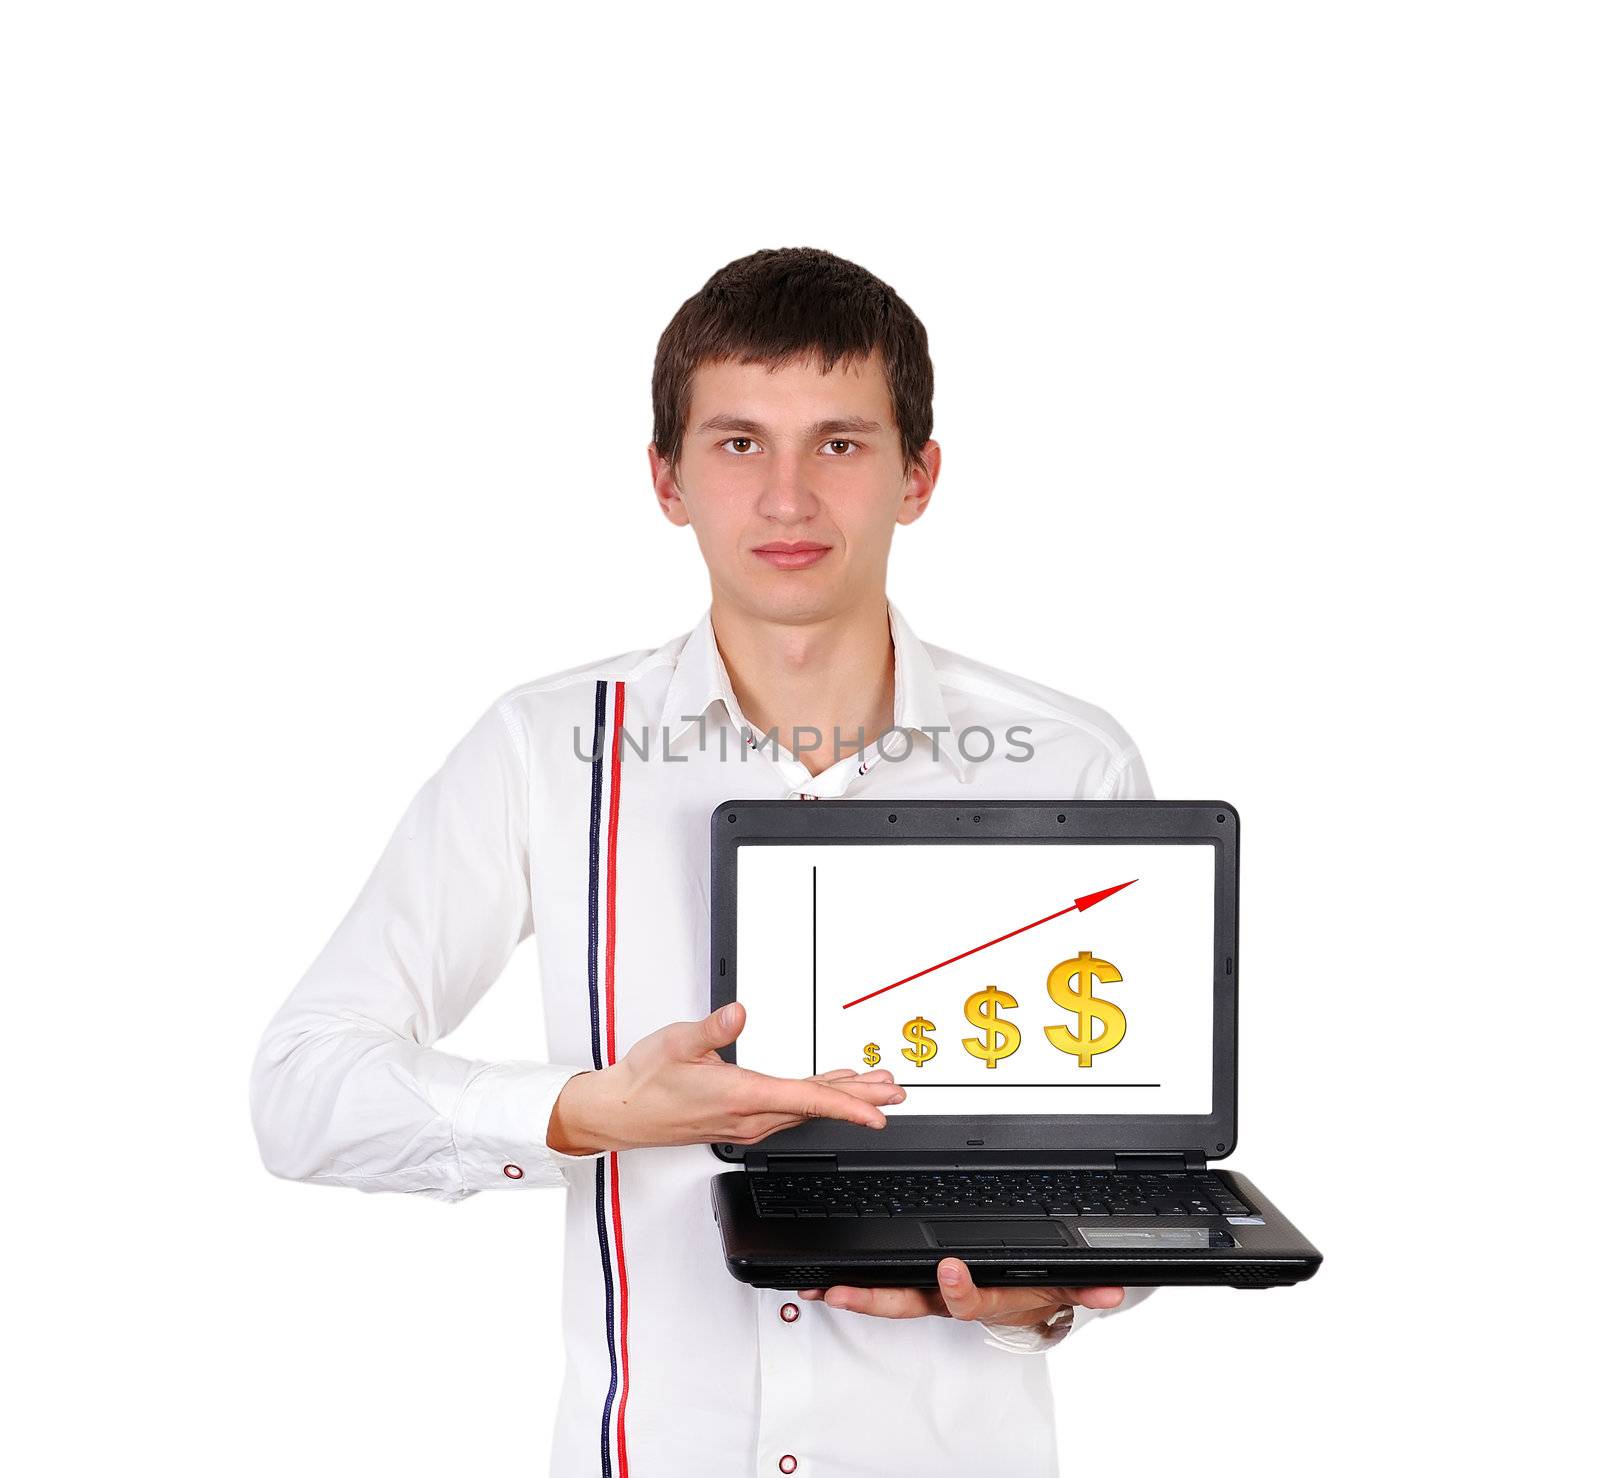 boy with laptop in hand points to growth dollar